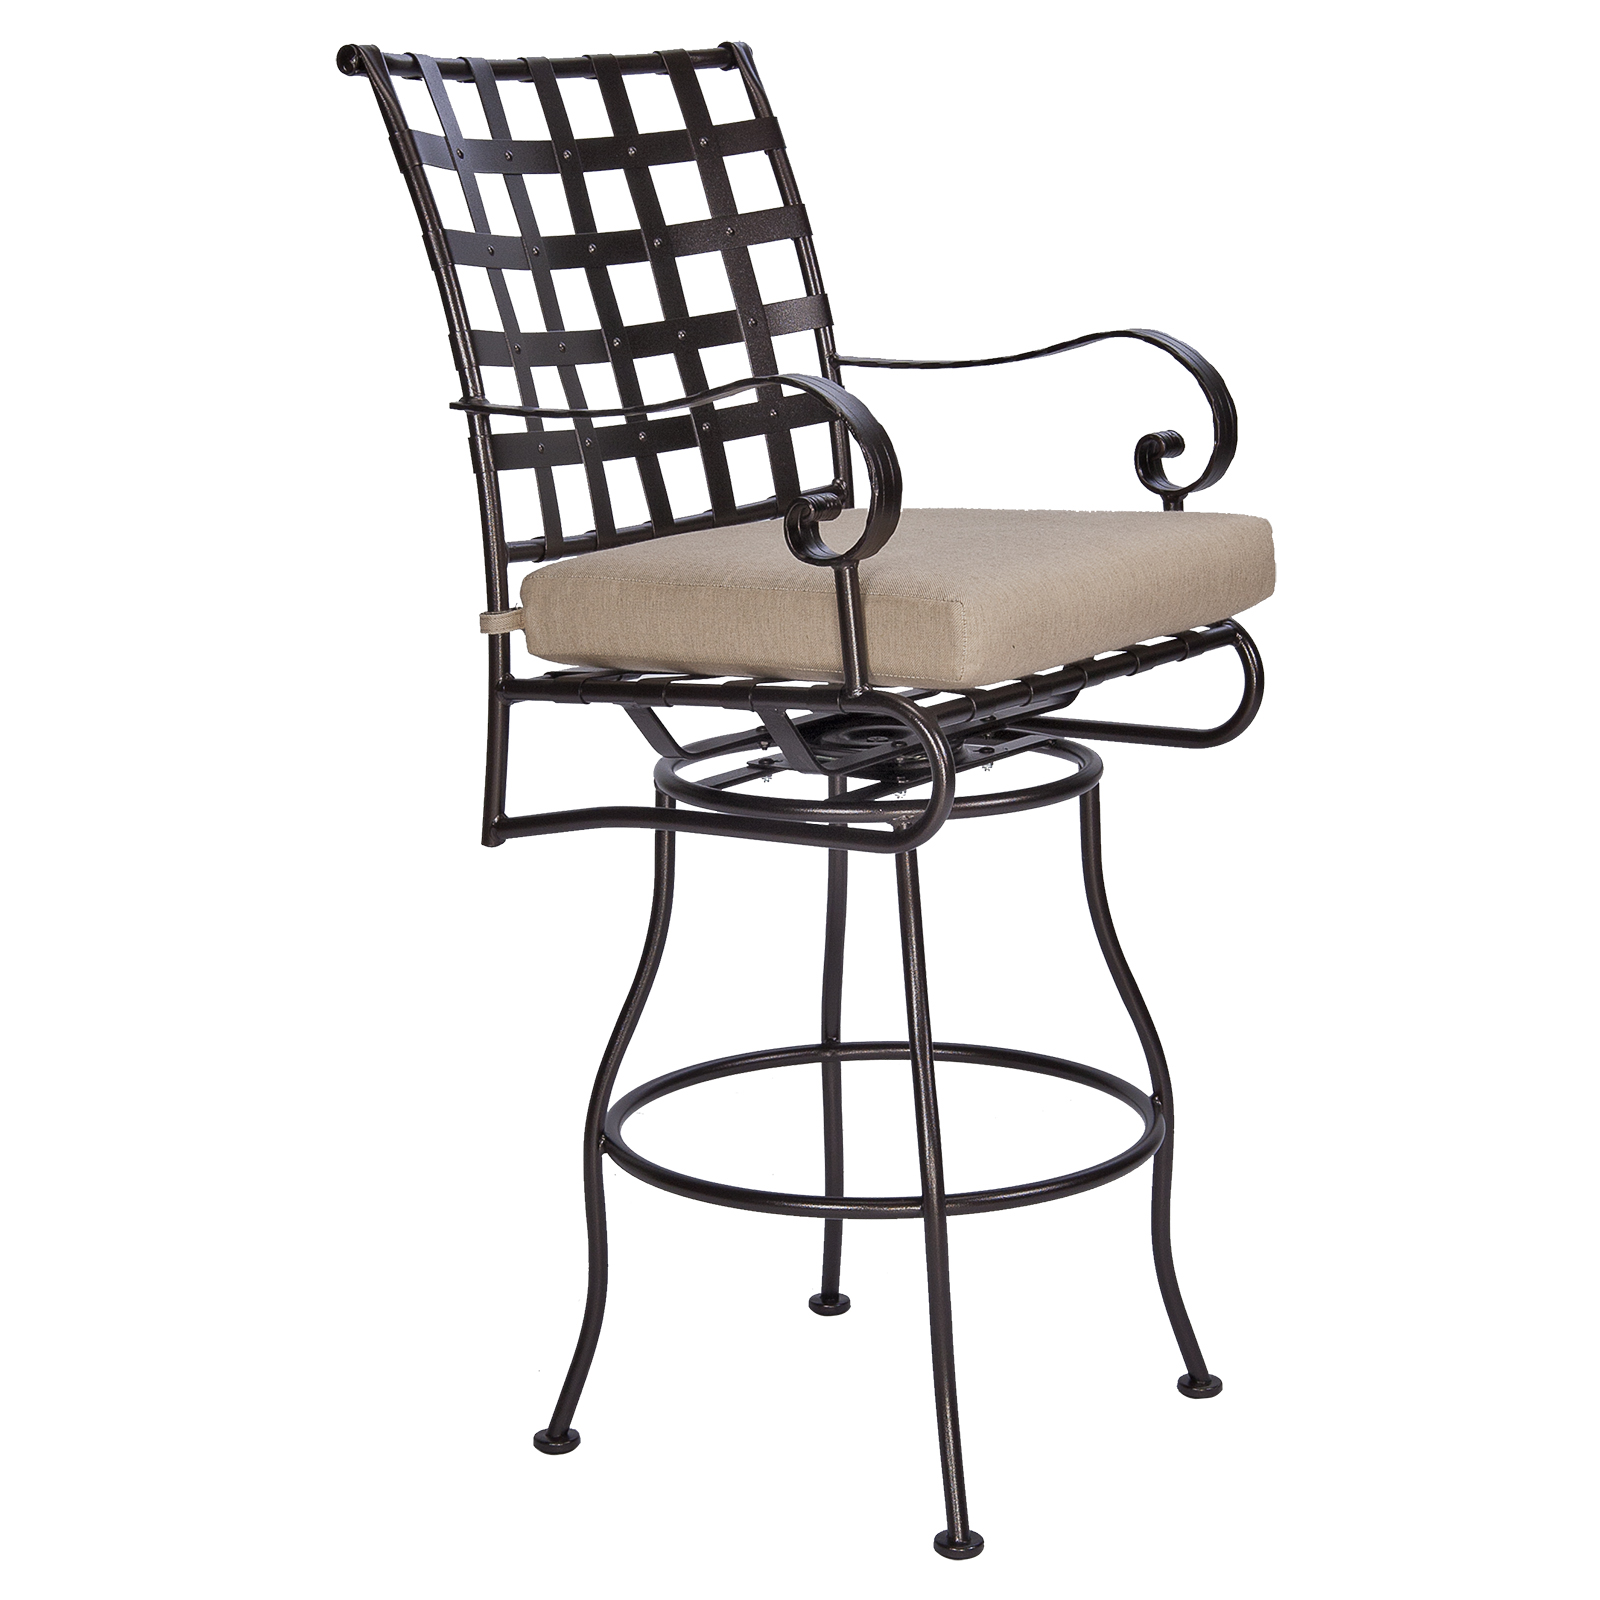 Swivel-Bar-Stool-With-Arms-953-SBSW_Catalog_GR35_1600-Classico-W-OW-Lee